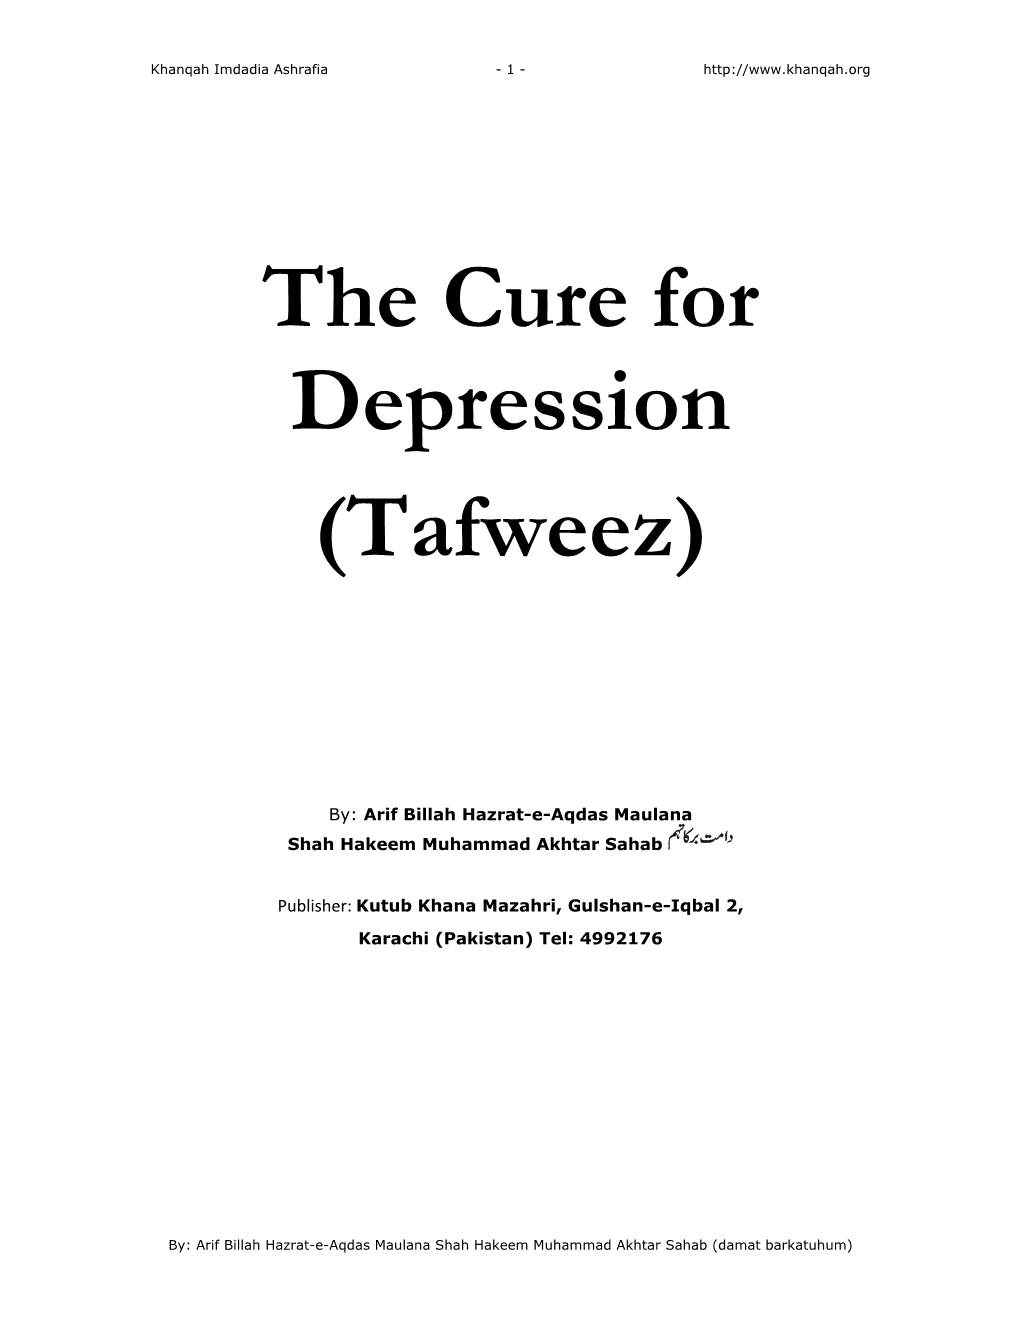 The Cure for Depression (Tafweez)